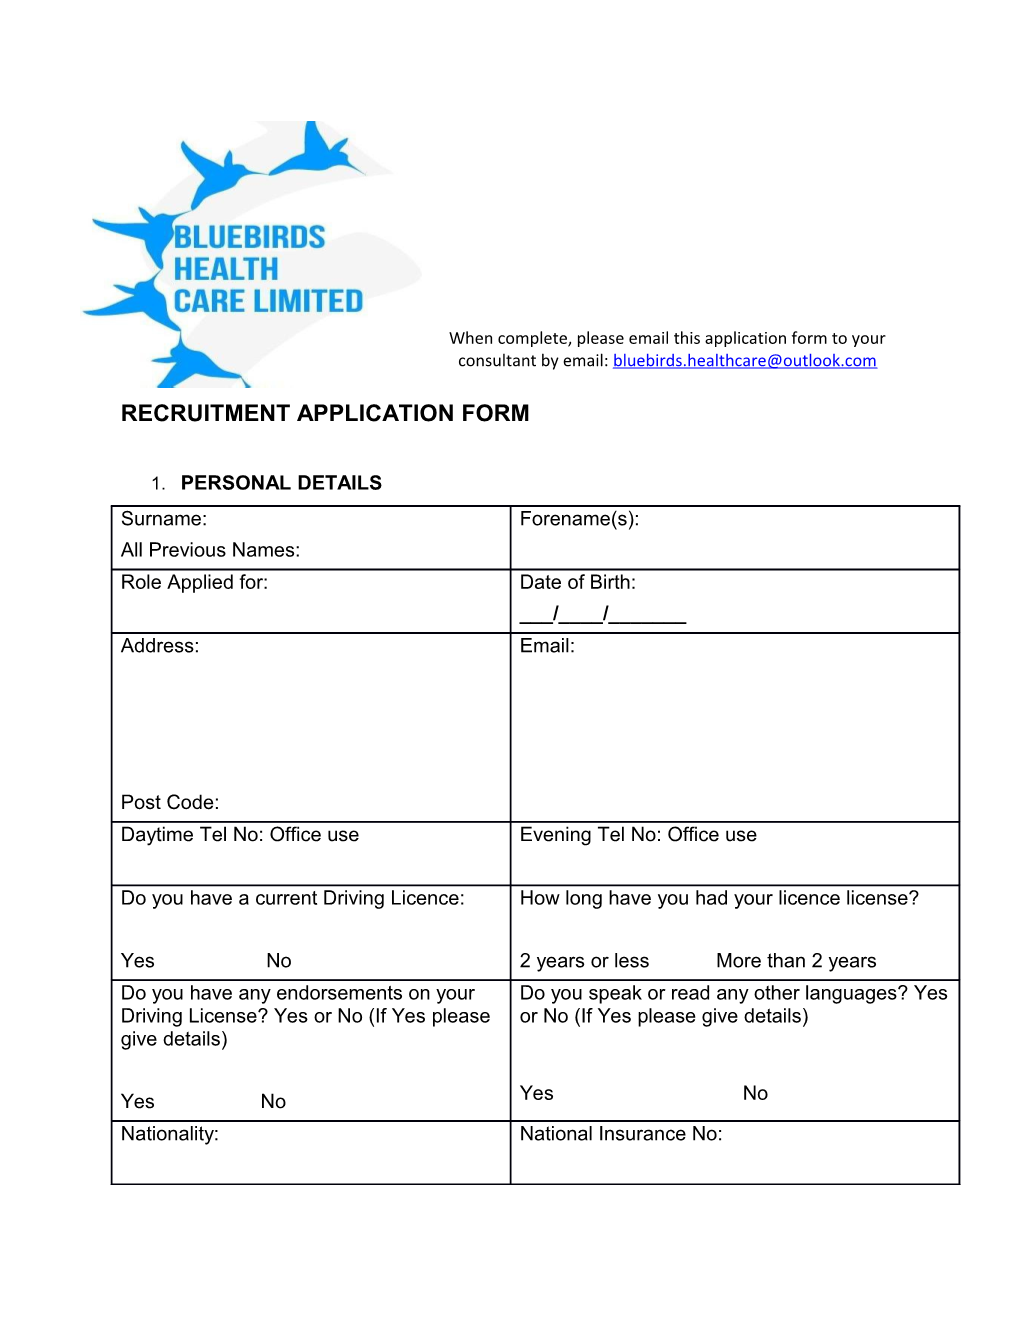 When Complete, Please Email This Application Form to Your Consultant by Email